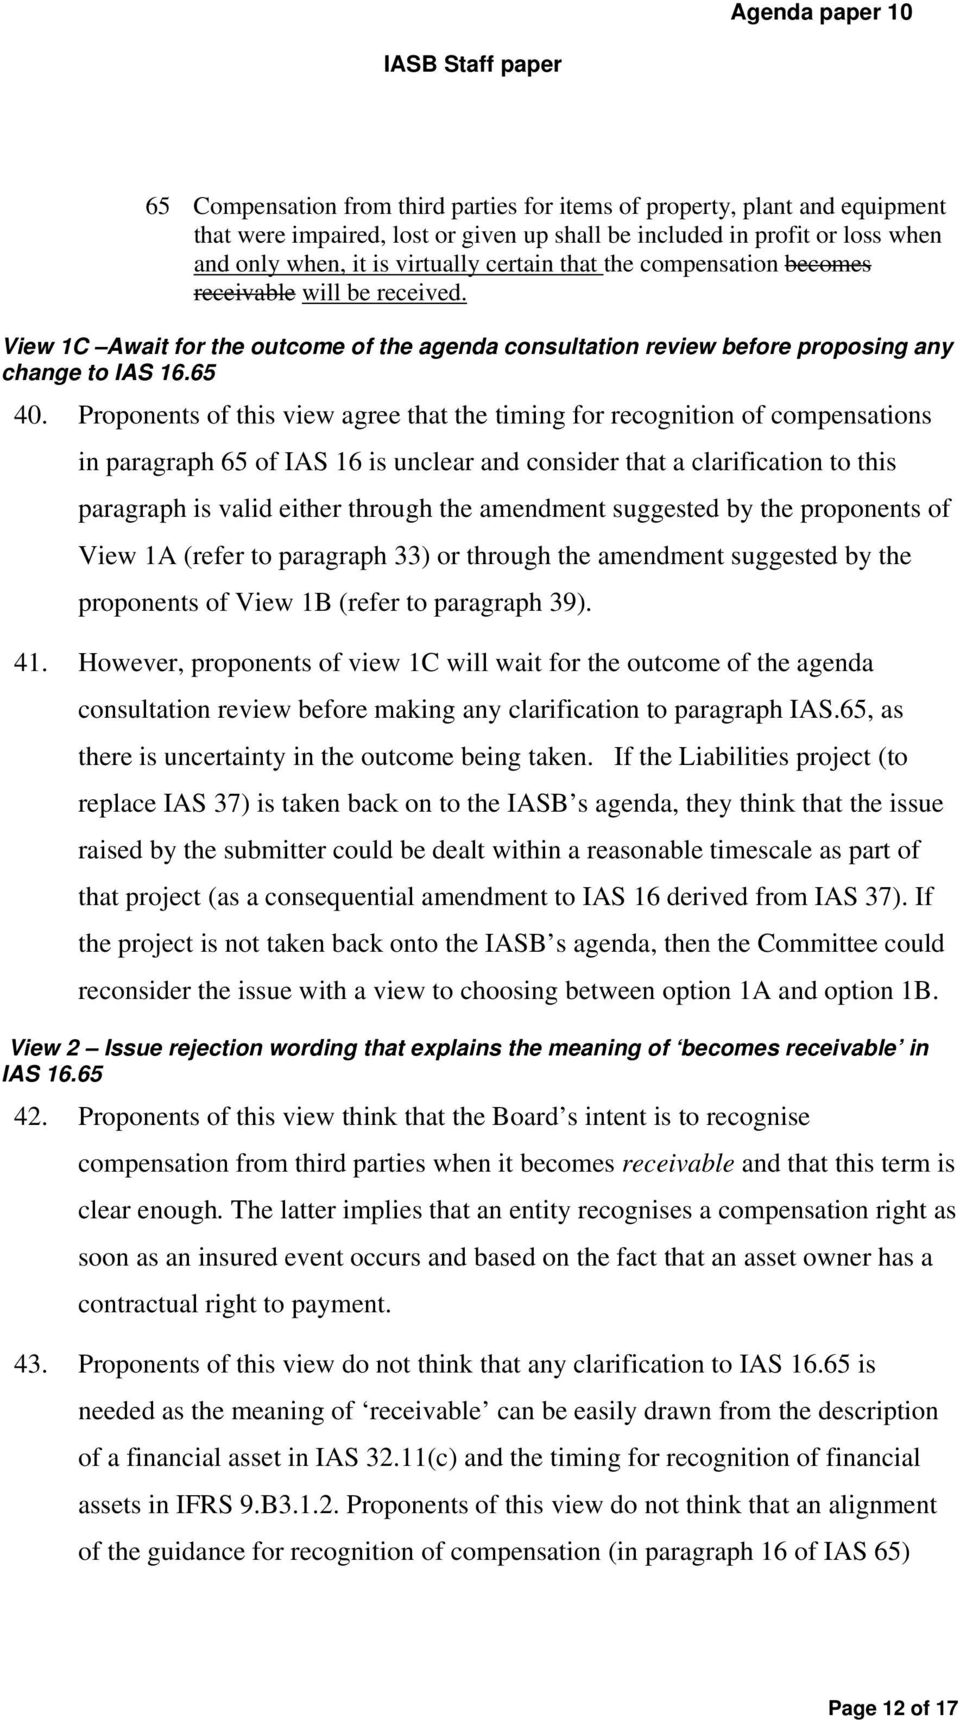 Proponents of this view agree that the timing for recognition of compensations in paragraph 65 of IAS 16 is unclear and consider that a clarification to this paragraph is valid either through the